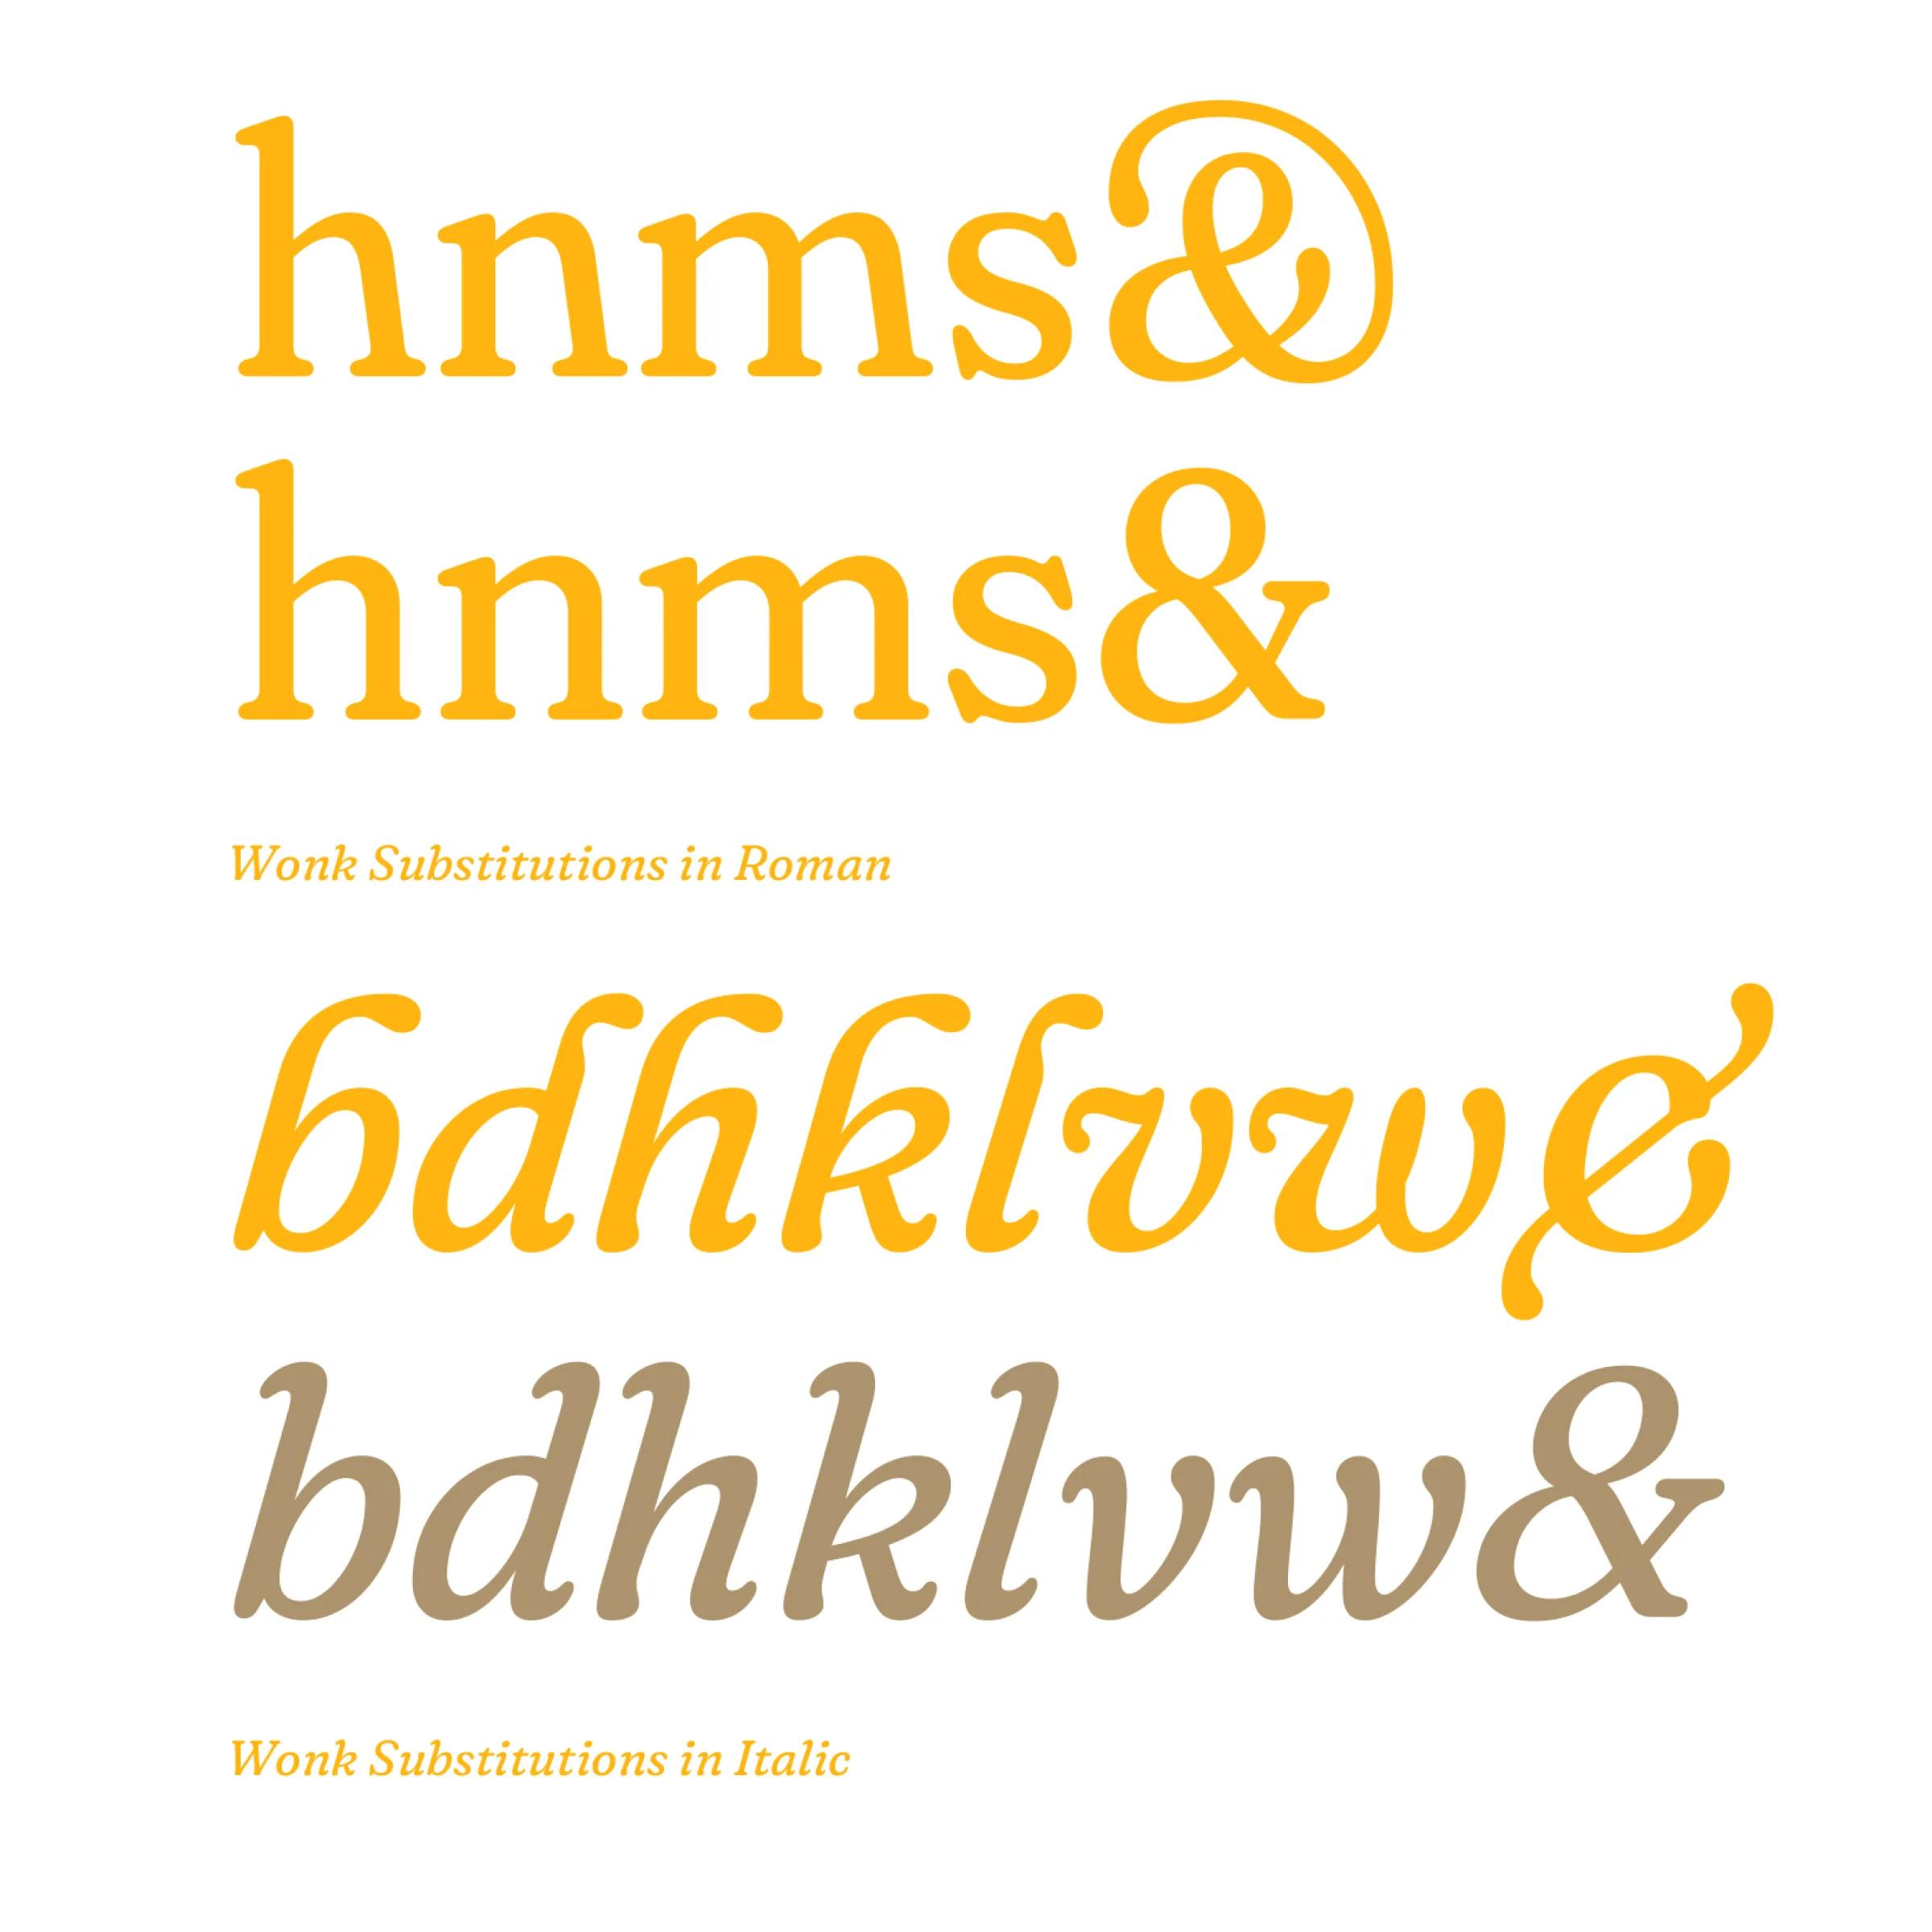 Sample letters shown with (above, orange) and without (below, brown) wonk substitutions applied